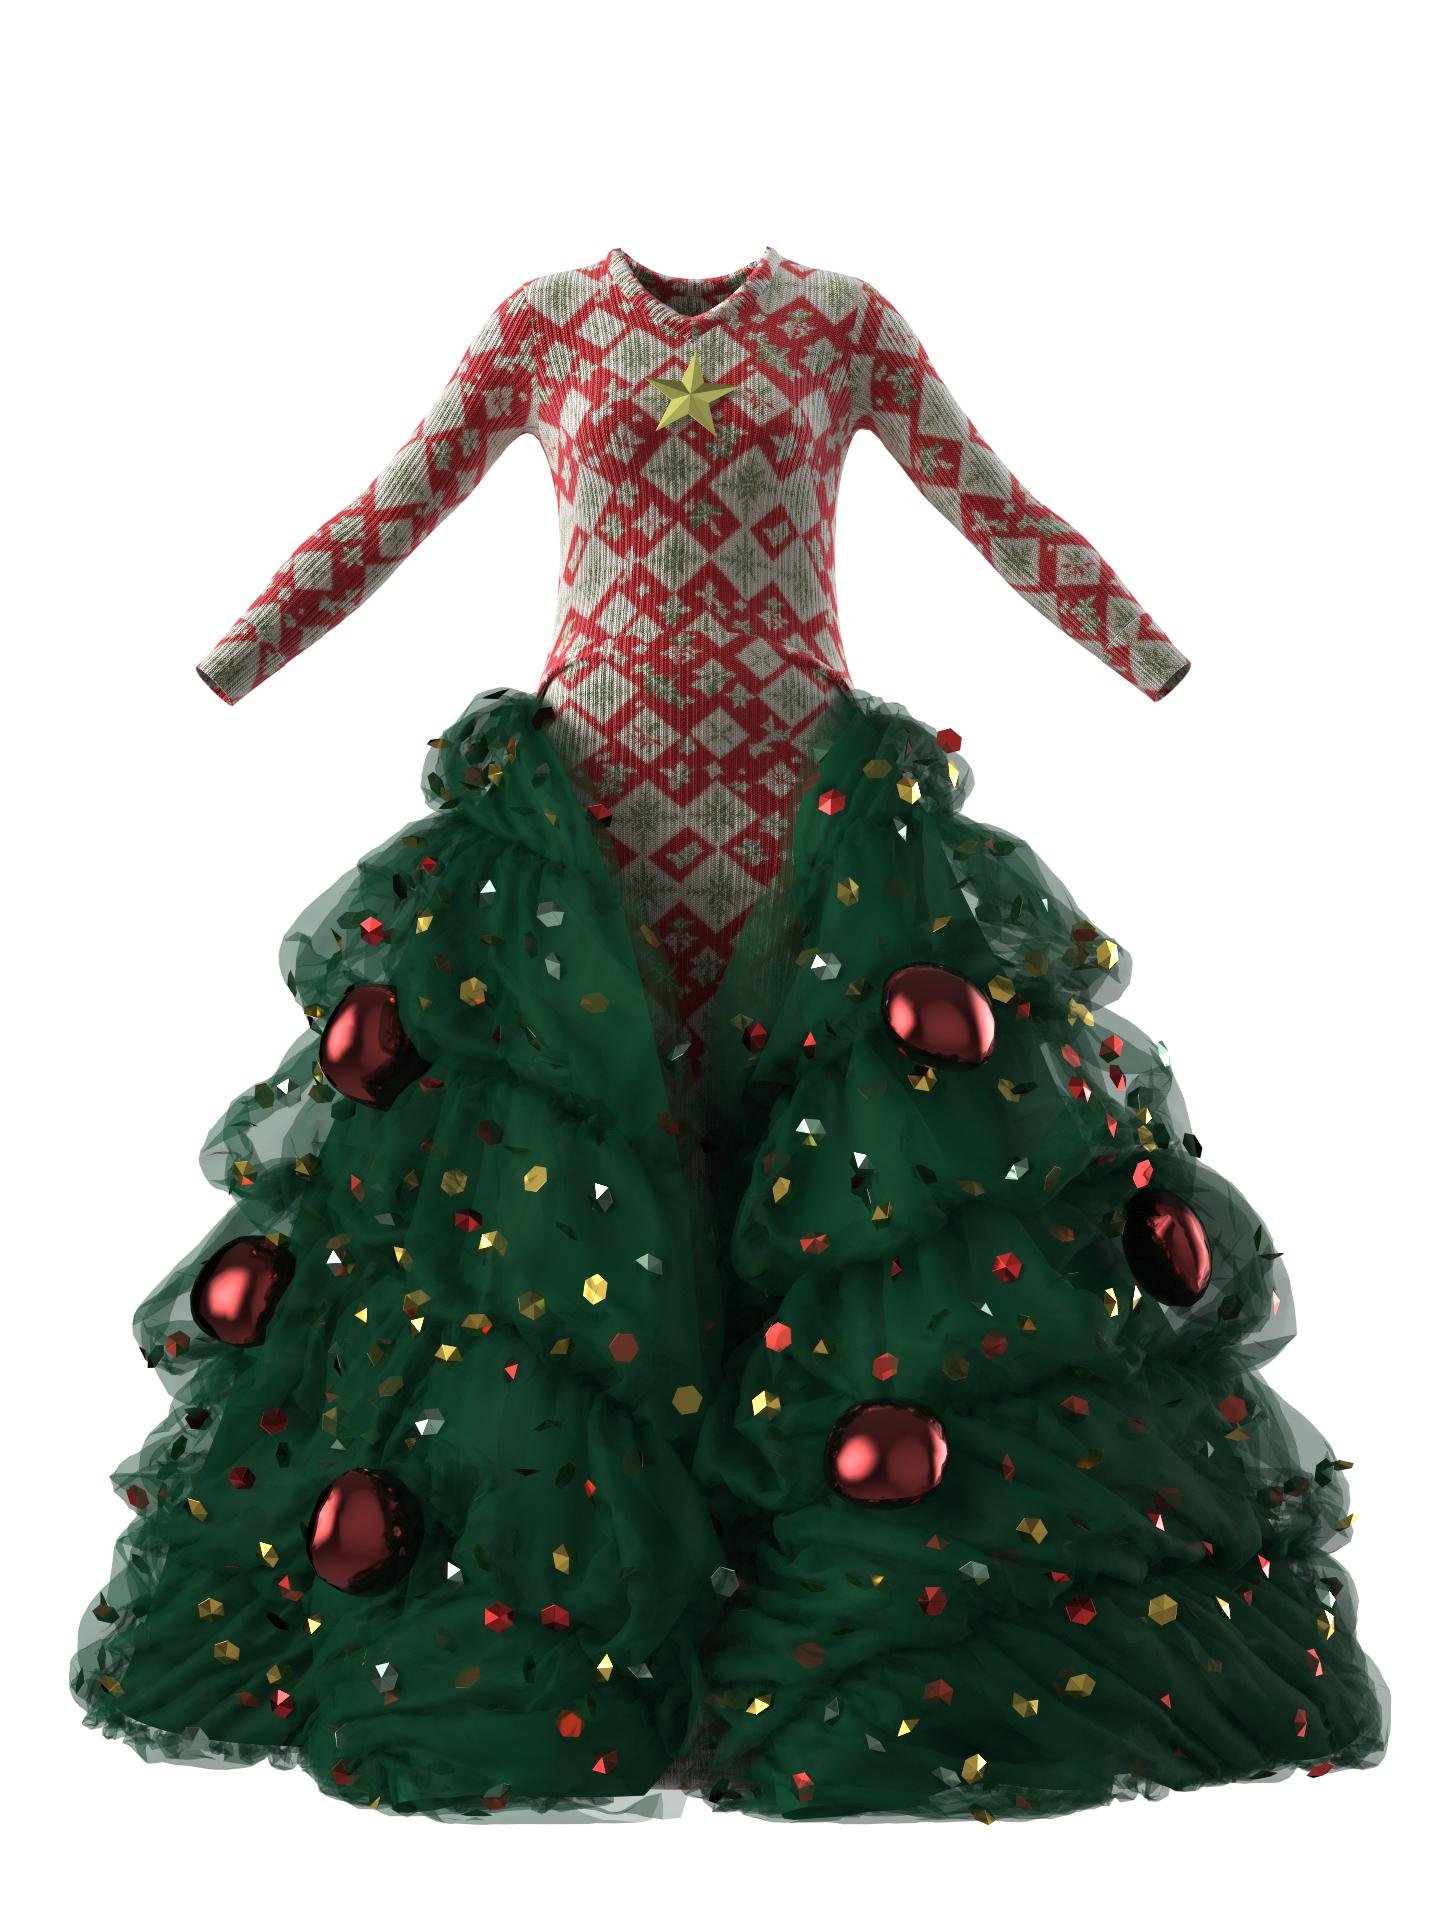 Christmas Gown-II-IV by SARA HASANPOUR